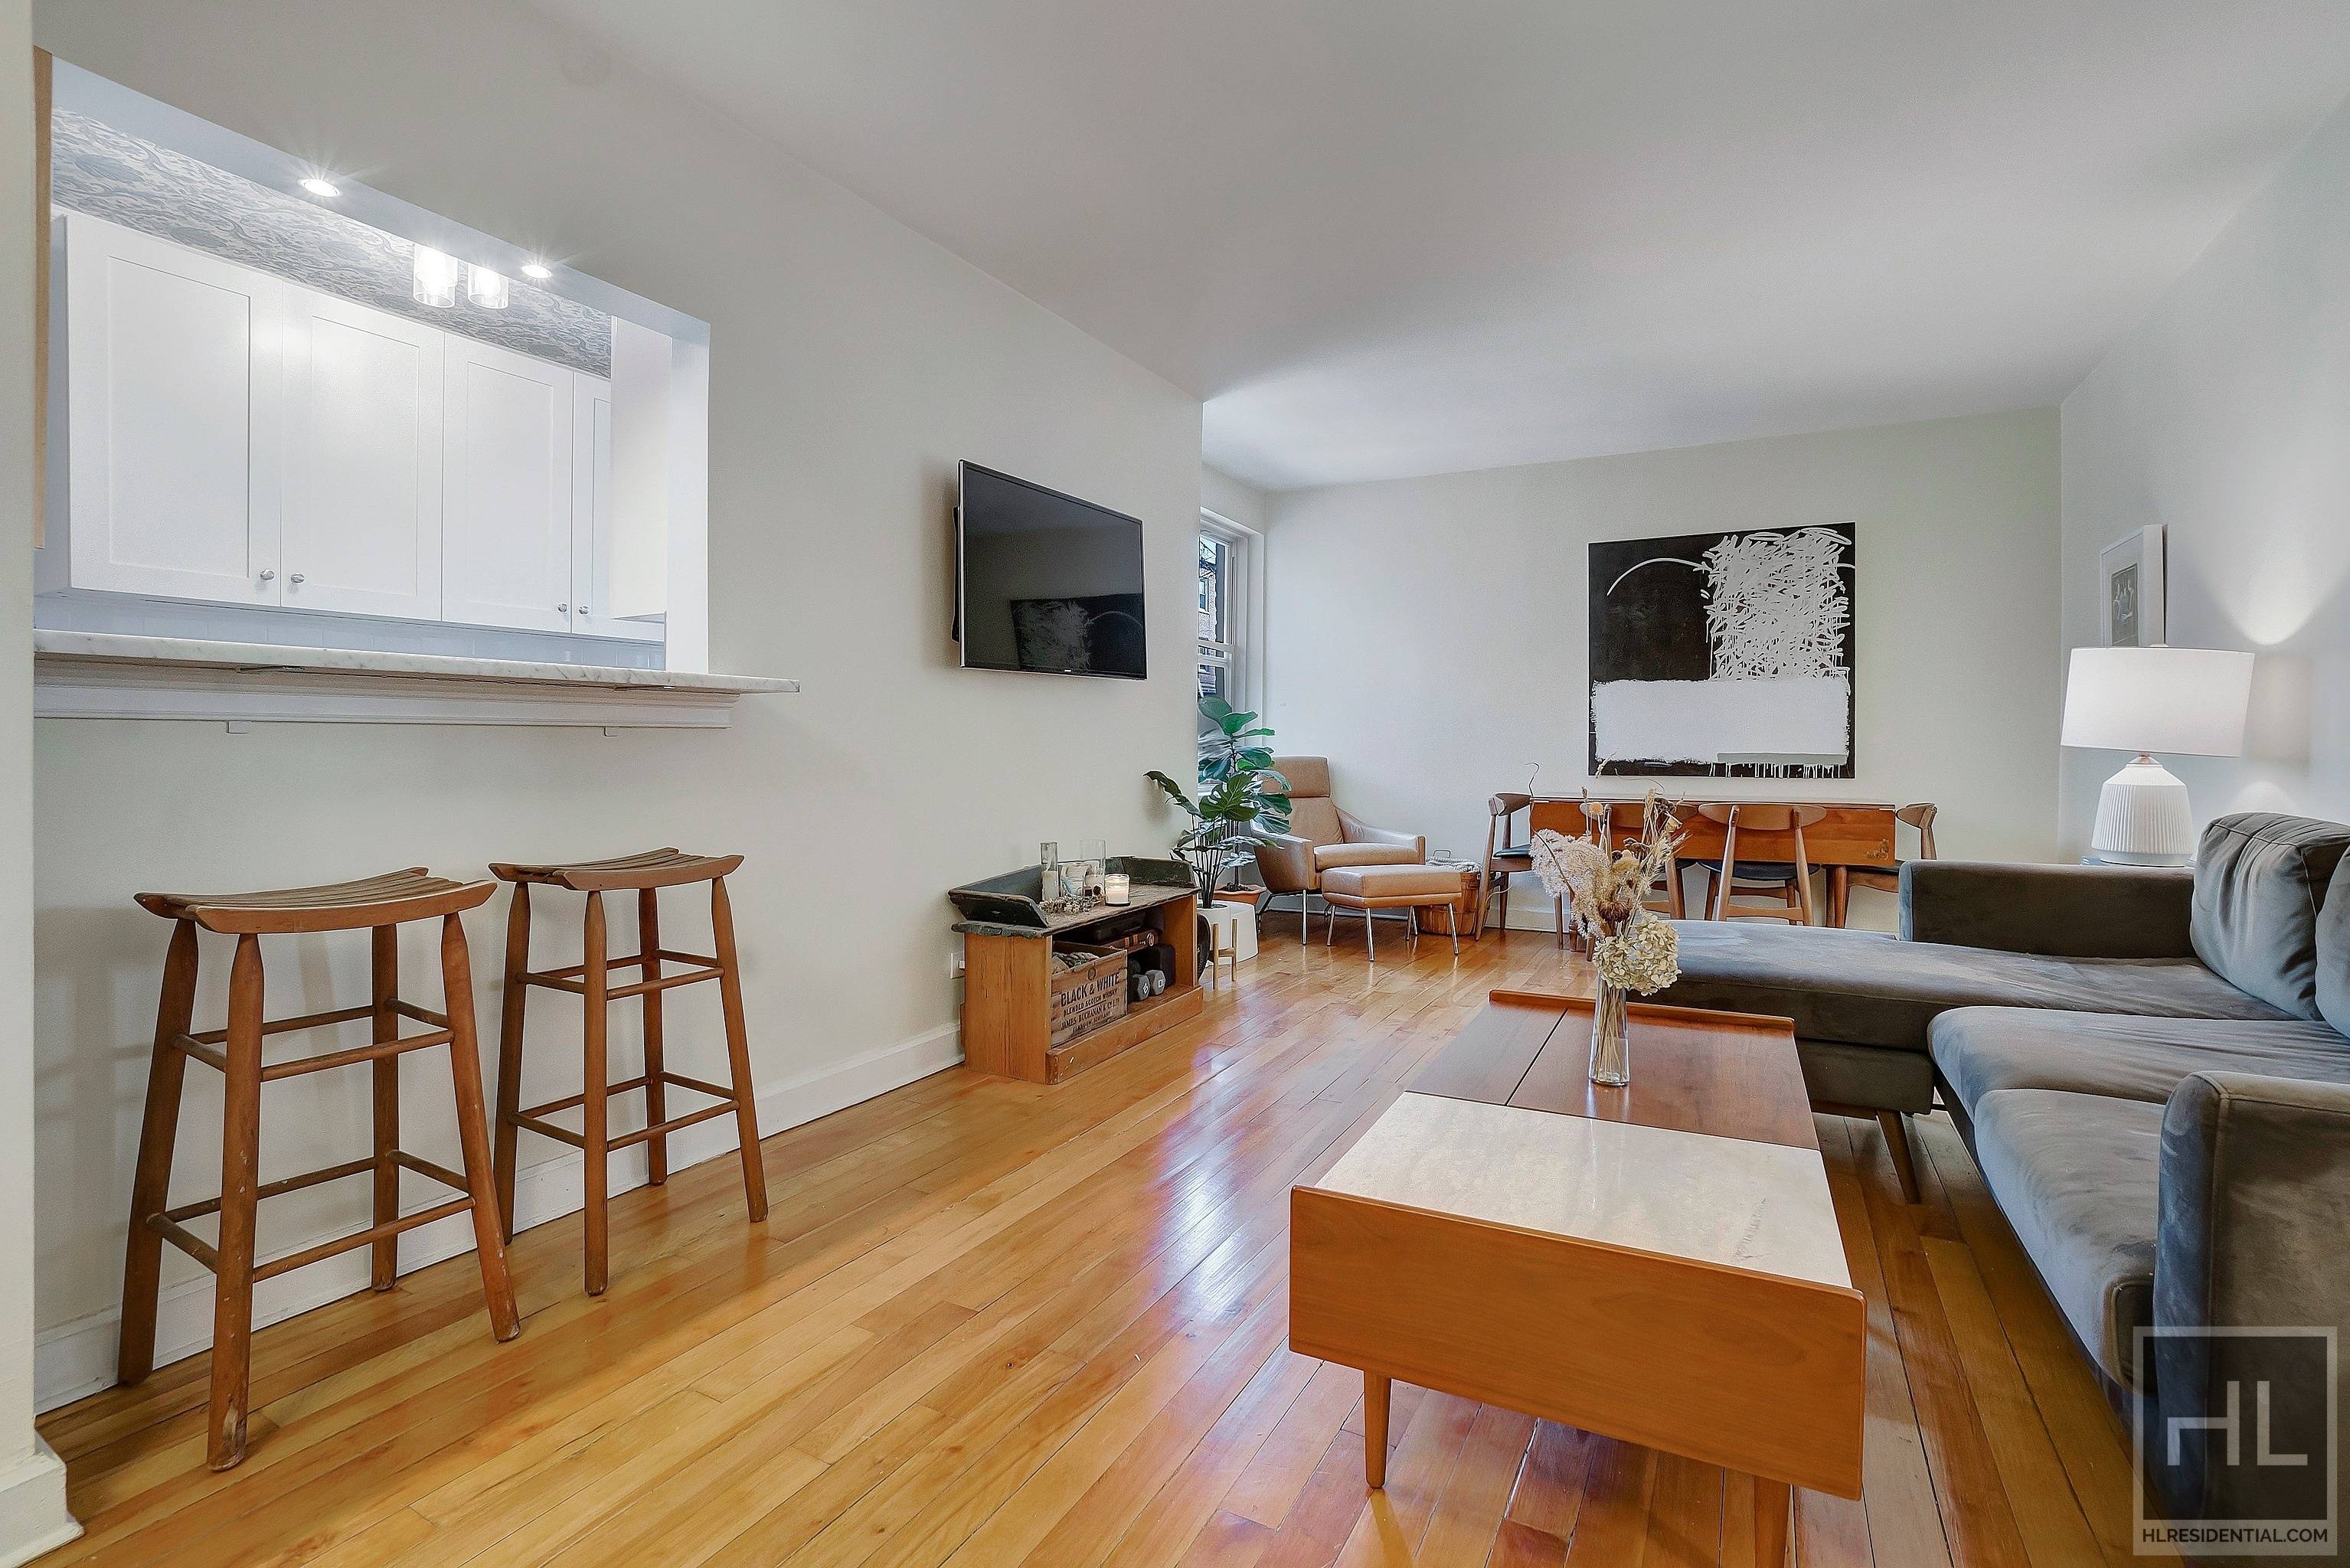 Beautifully Renovated 1BR in Sunnyhill Gardens.